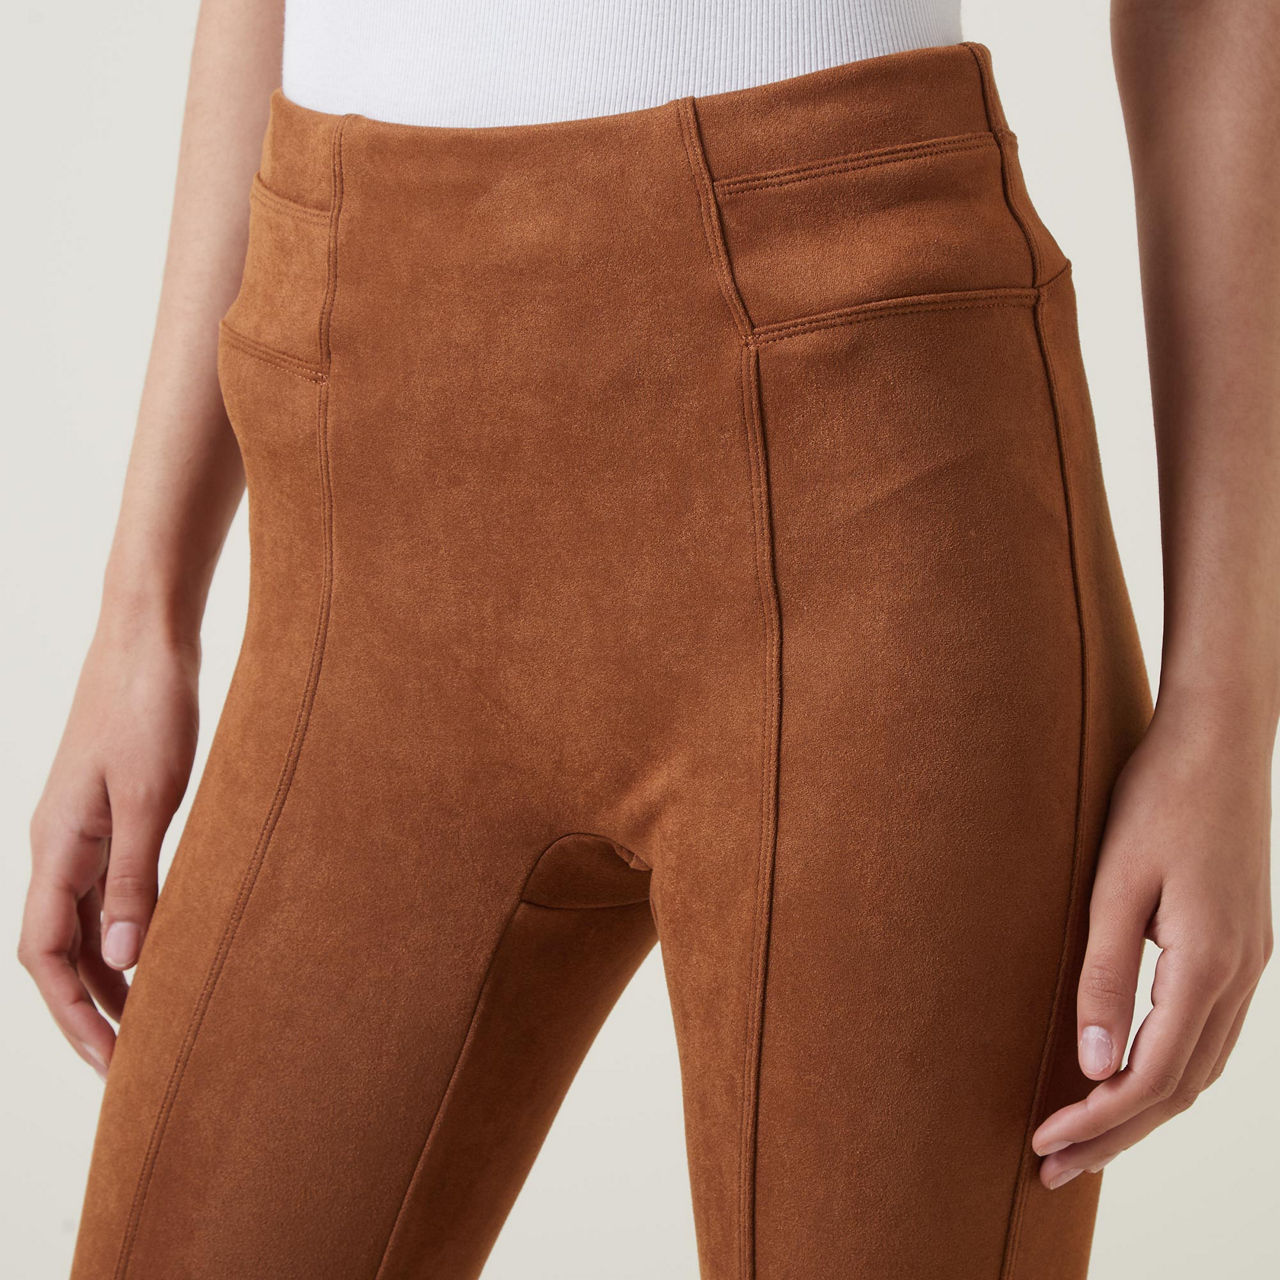 SPANX FAUX SUEDE LEGGINGS - CARAMEL – The Navy Knot